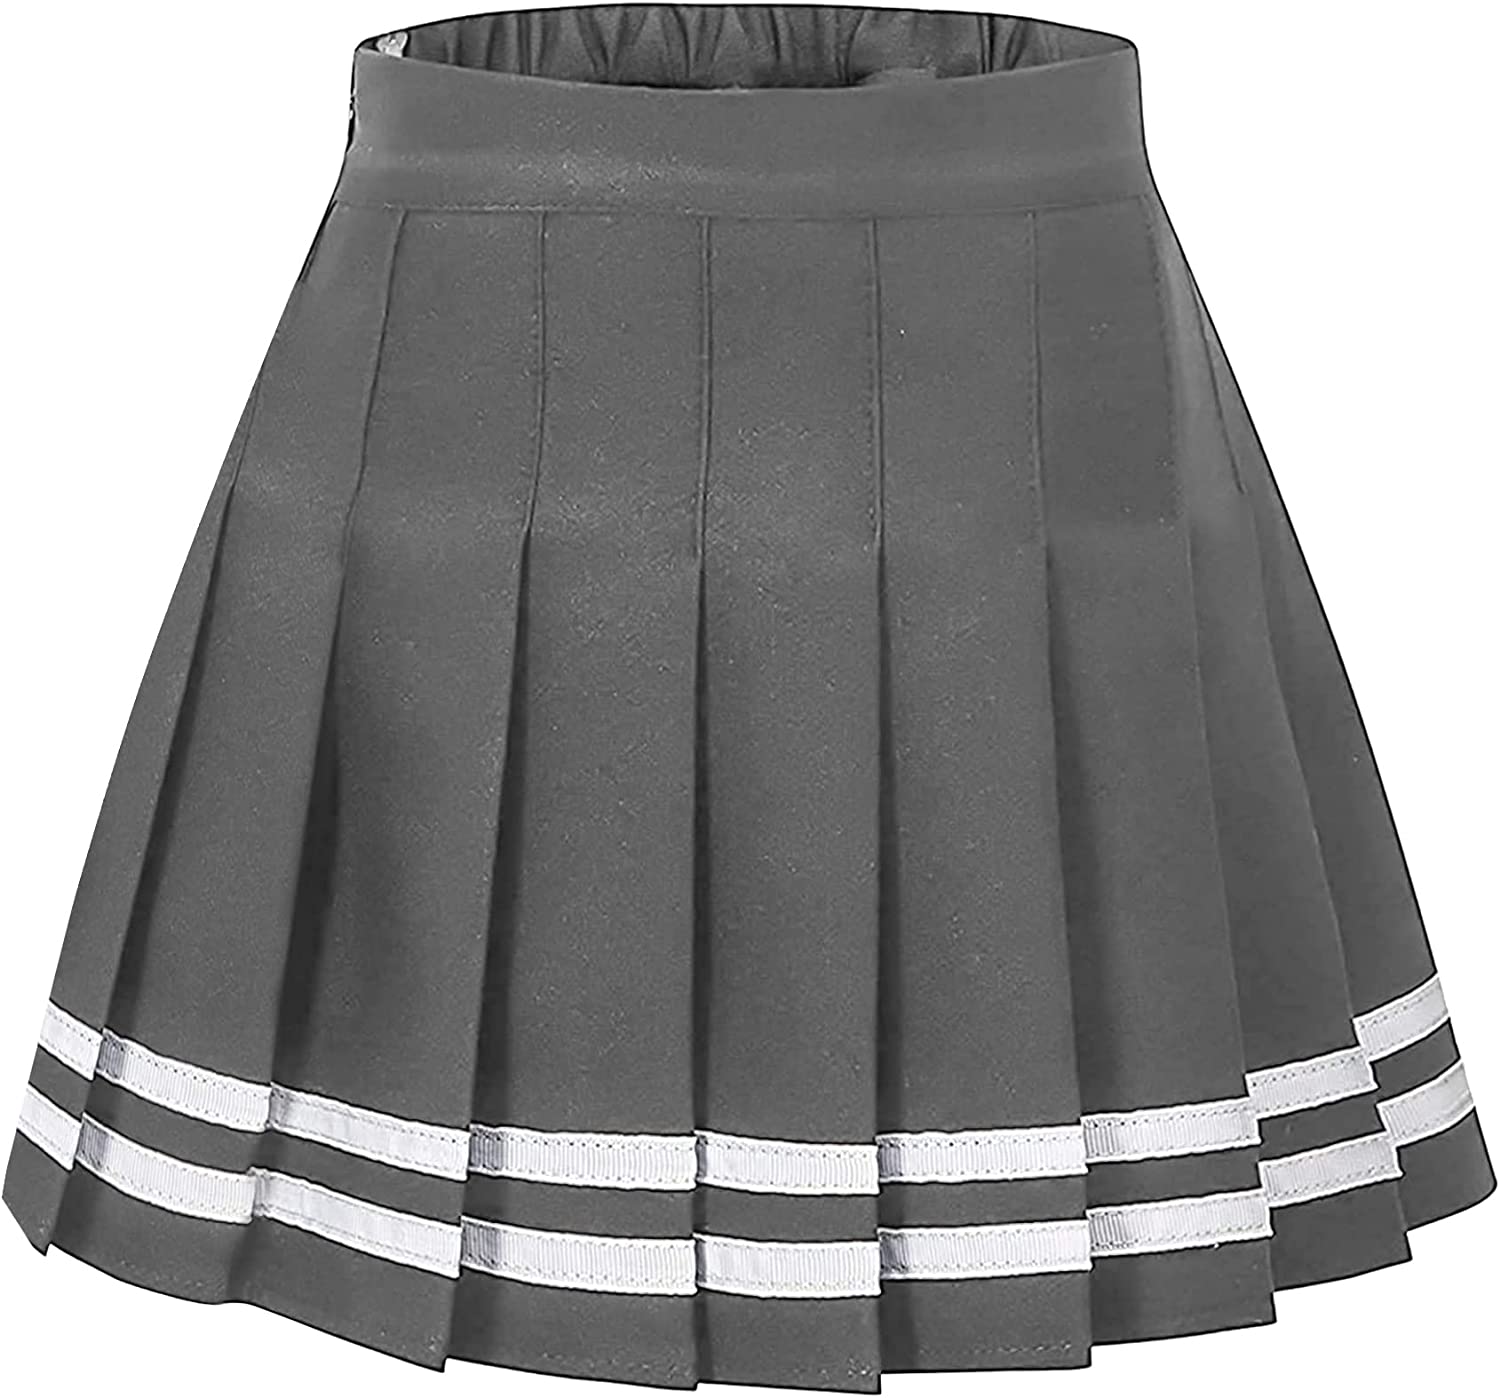 Adult XL SANGTREE Girls & Womens Pleated Skirt with Comfy Stretchy Band 2 Years 